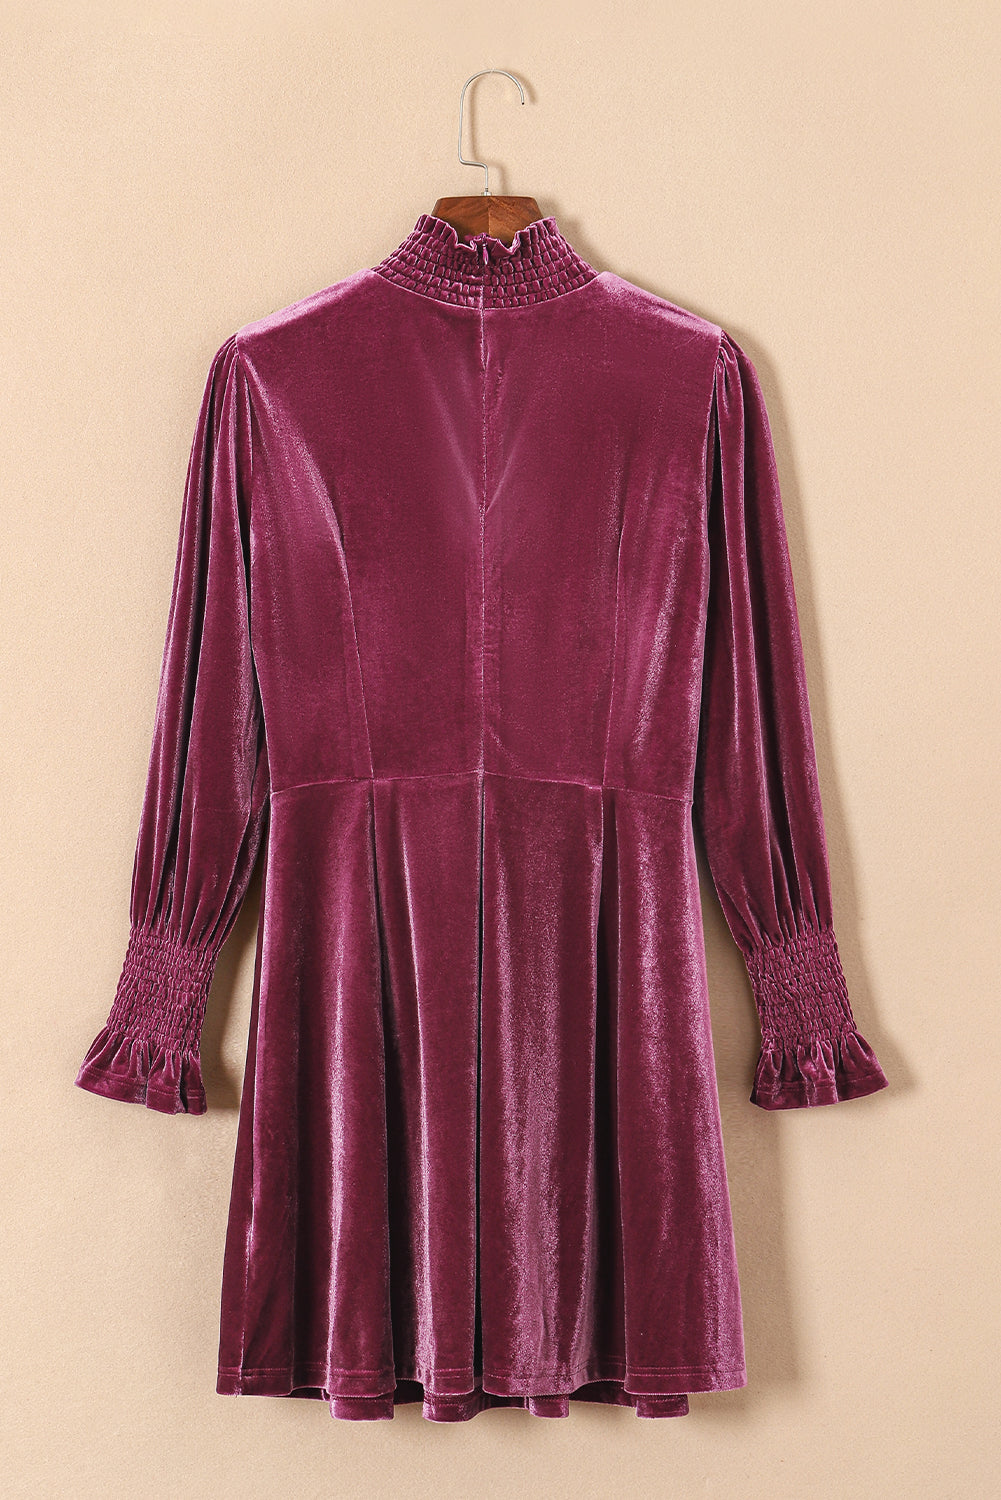 Burgundy Long Sleeve Dress, Smocked High Neck Flounce Sleeve Velvet Dress All In Stock casual dresses clothes Color Pink Day Valentine's Day dress dresses EDM Monthly Recomend Fabric Velvet long sleeve dress long sleeve dresses Occasion Daily Print Solid Color Season Winter short dresses Silhouette A-Line Style Southern Belle